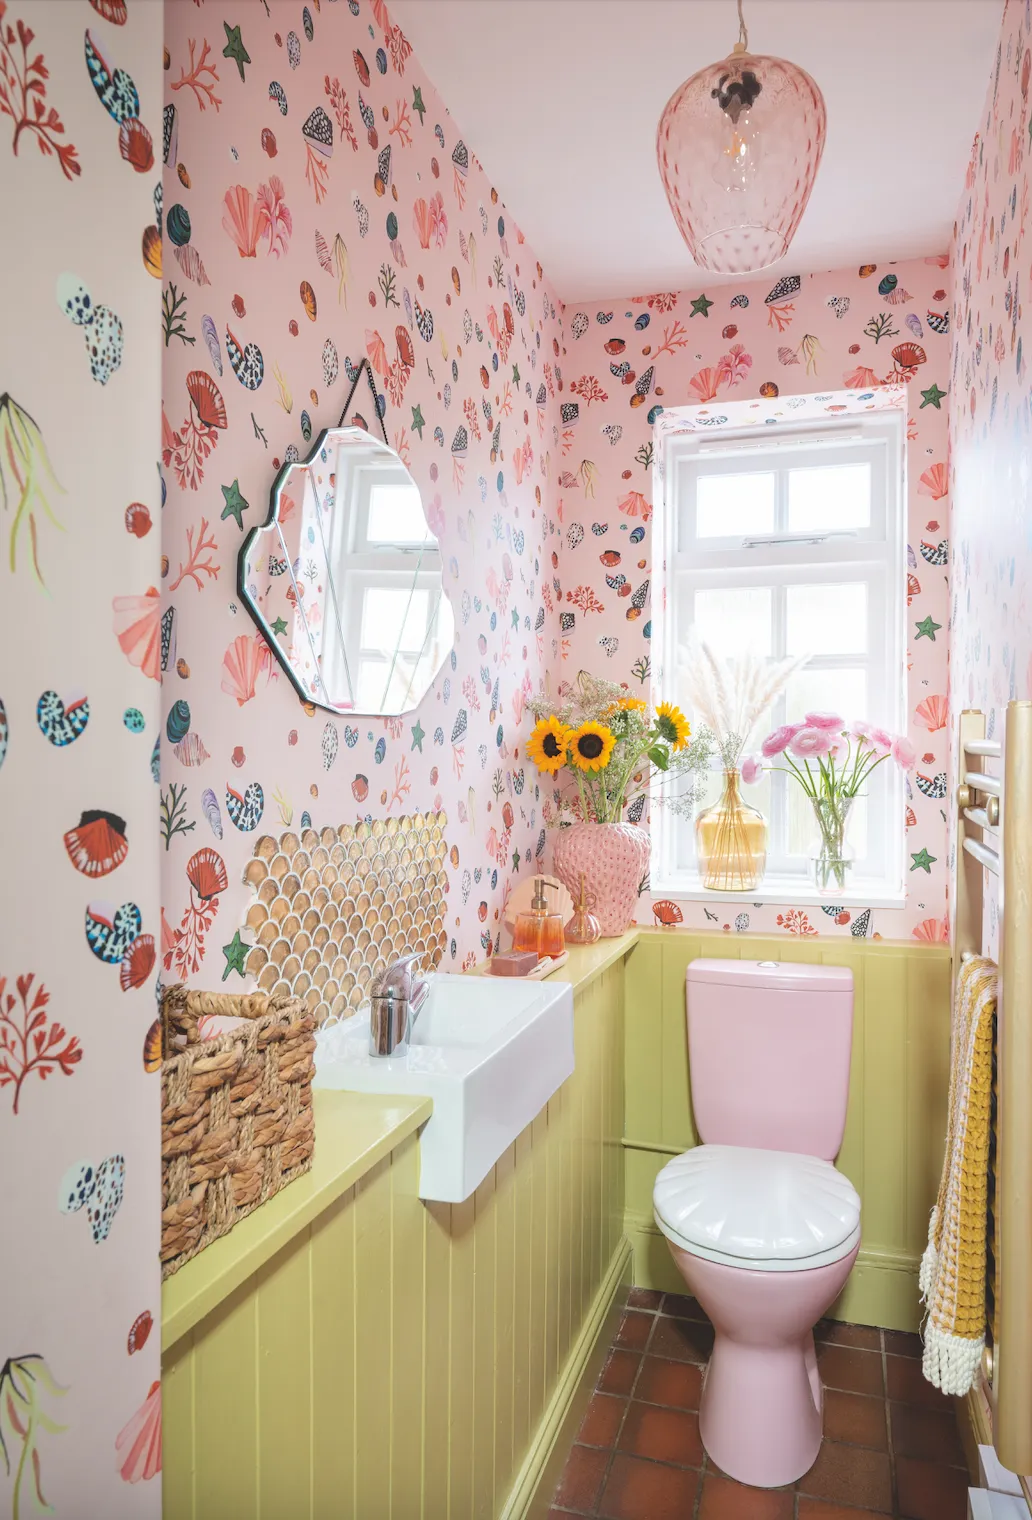 ‘I love the shell mirror as it adds to the overall look, but I also love my pink painted toilet… who wouldn’t?’